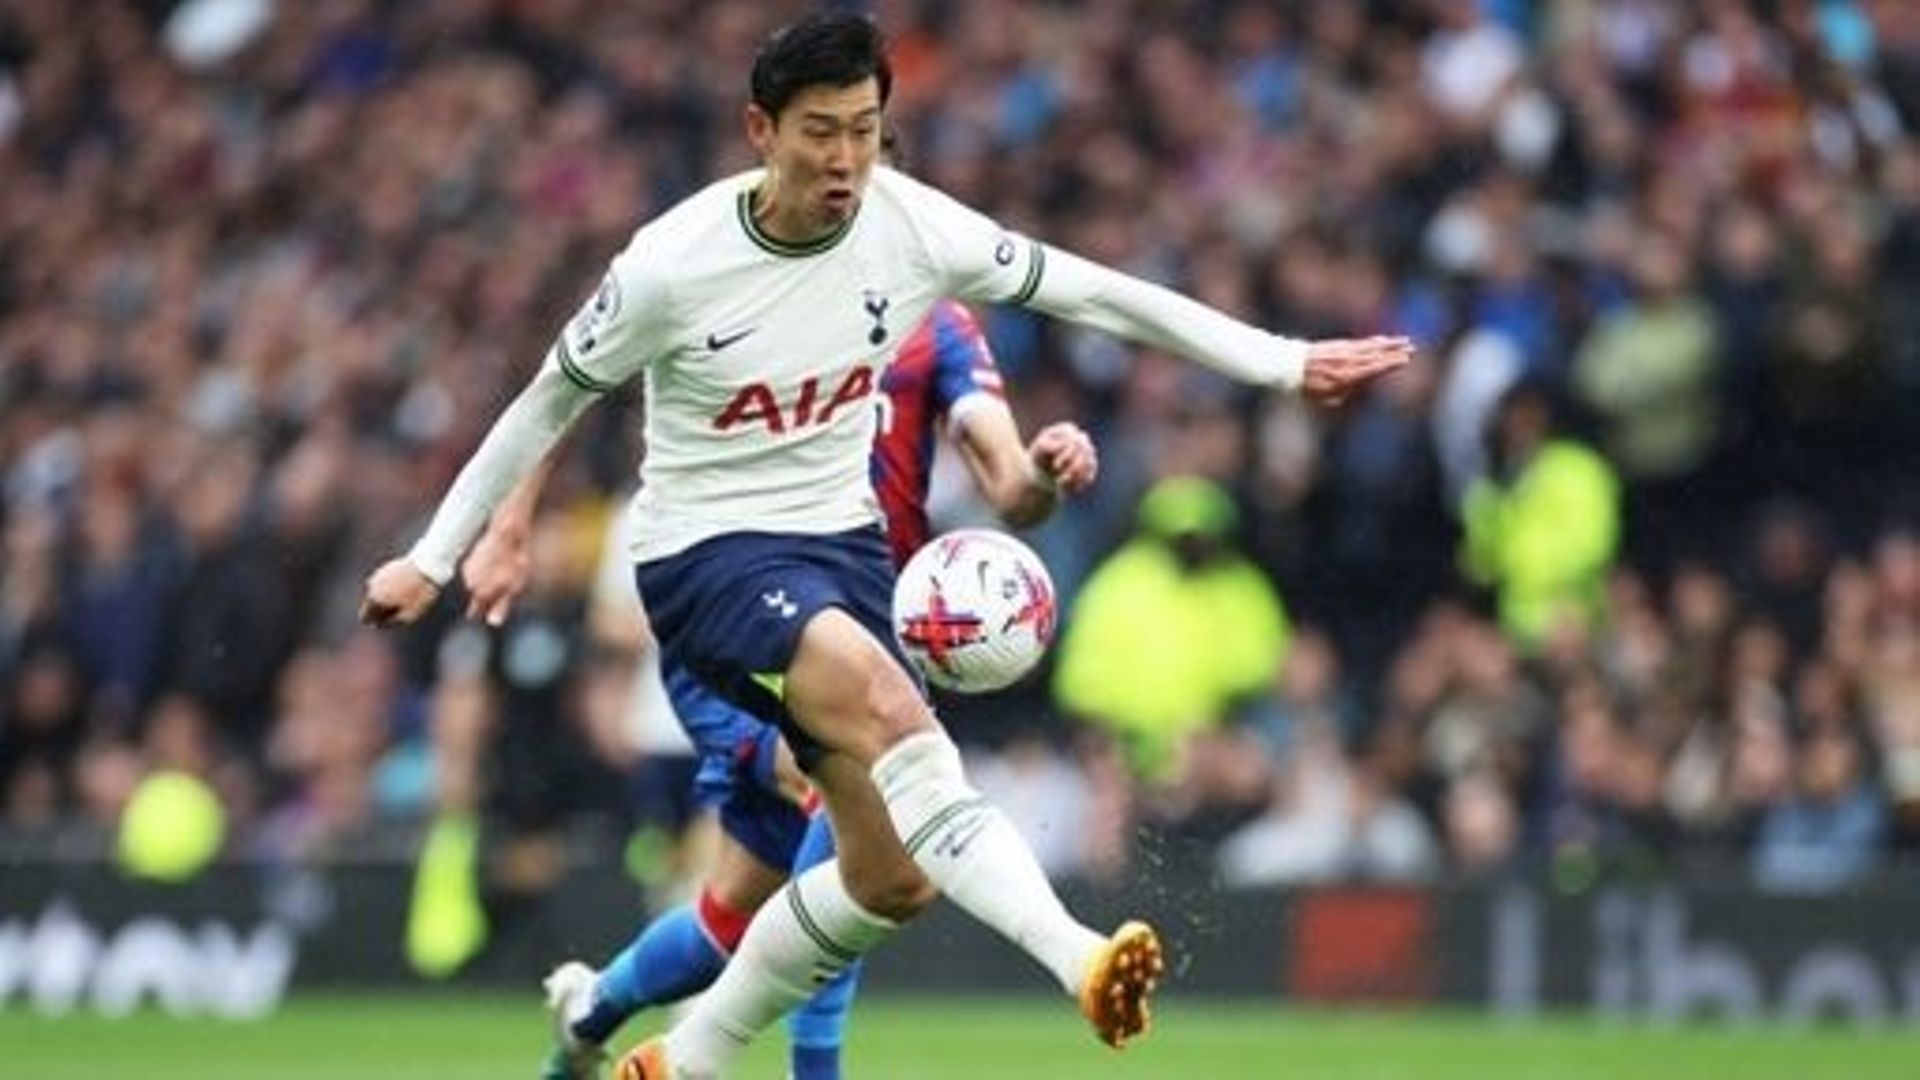 Tottenham Hotspur’s South Korean striker Son Heung-Min runs with the ball during the English Premier League football match between Tottenham Hotspur and Crystal Palace at Tottenham Hotspur Stadium in London, on May 6, 2023. ISABEL INFANTES / AFP